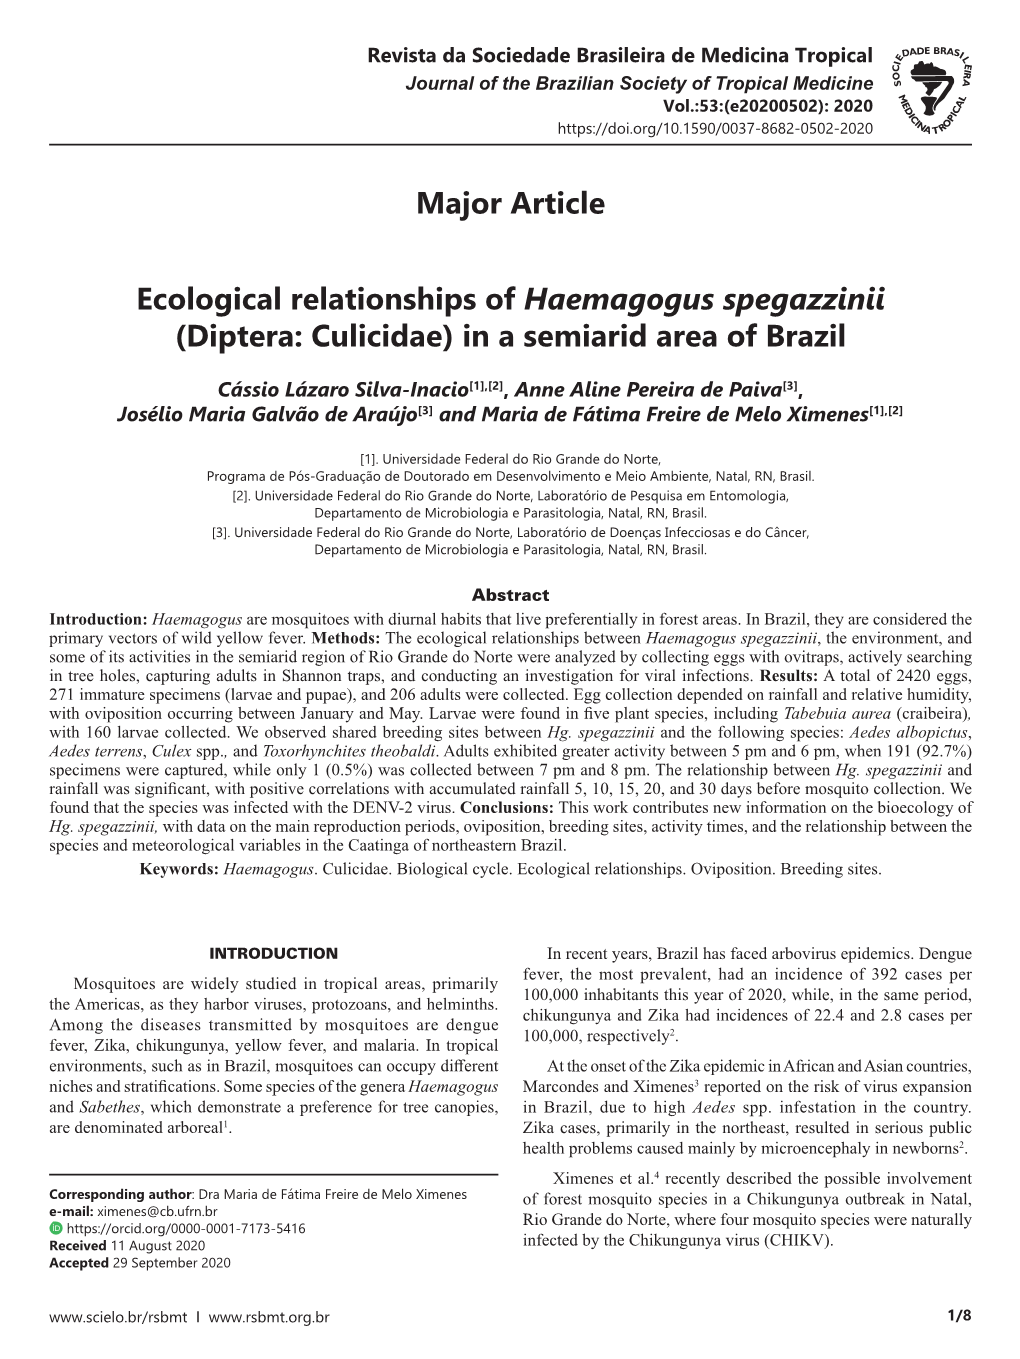 Ecological Relationships of Haemagogus Spegazzinii (Diptera: Culicidae) in a Semiarid Area of Brazil